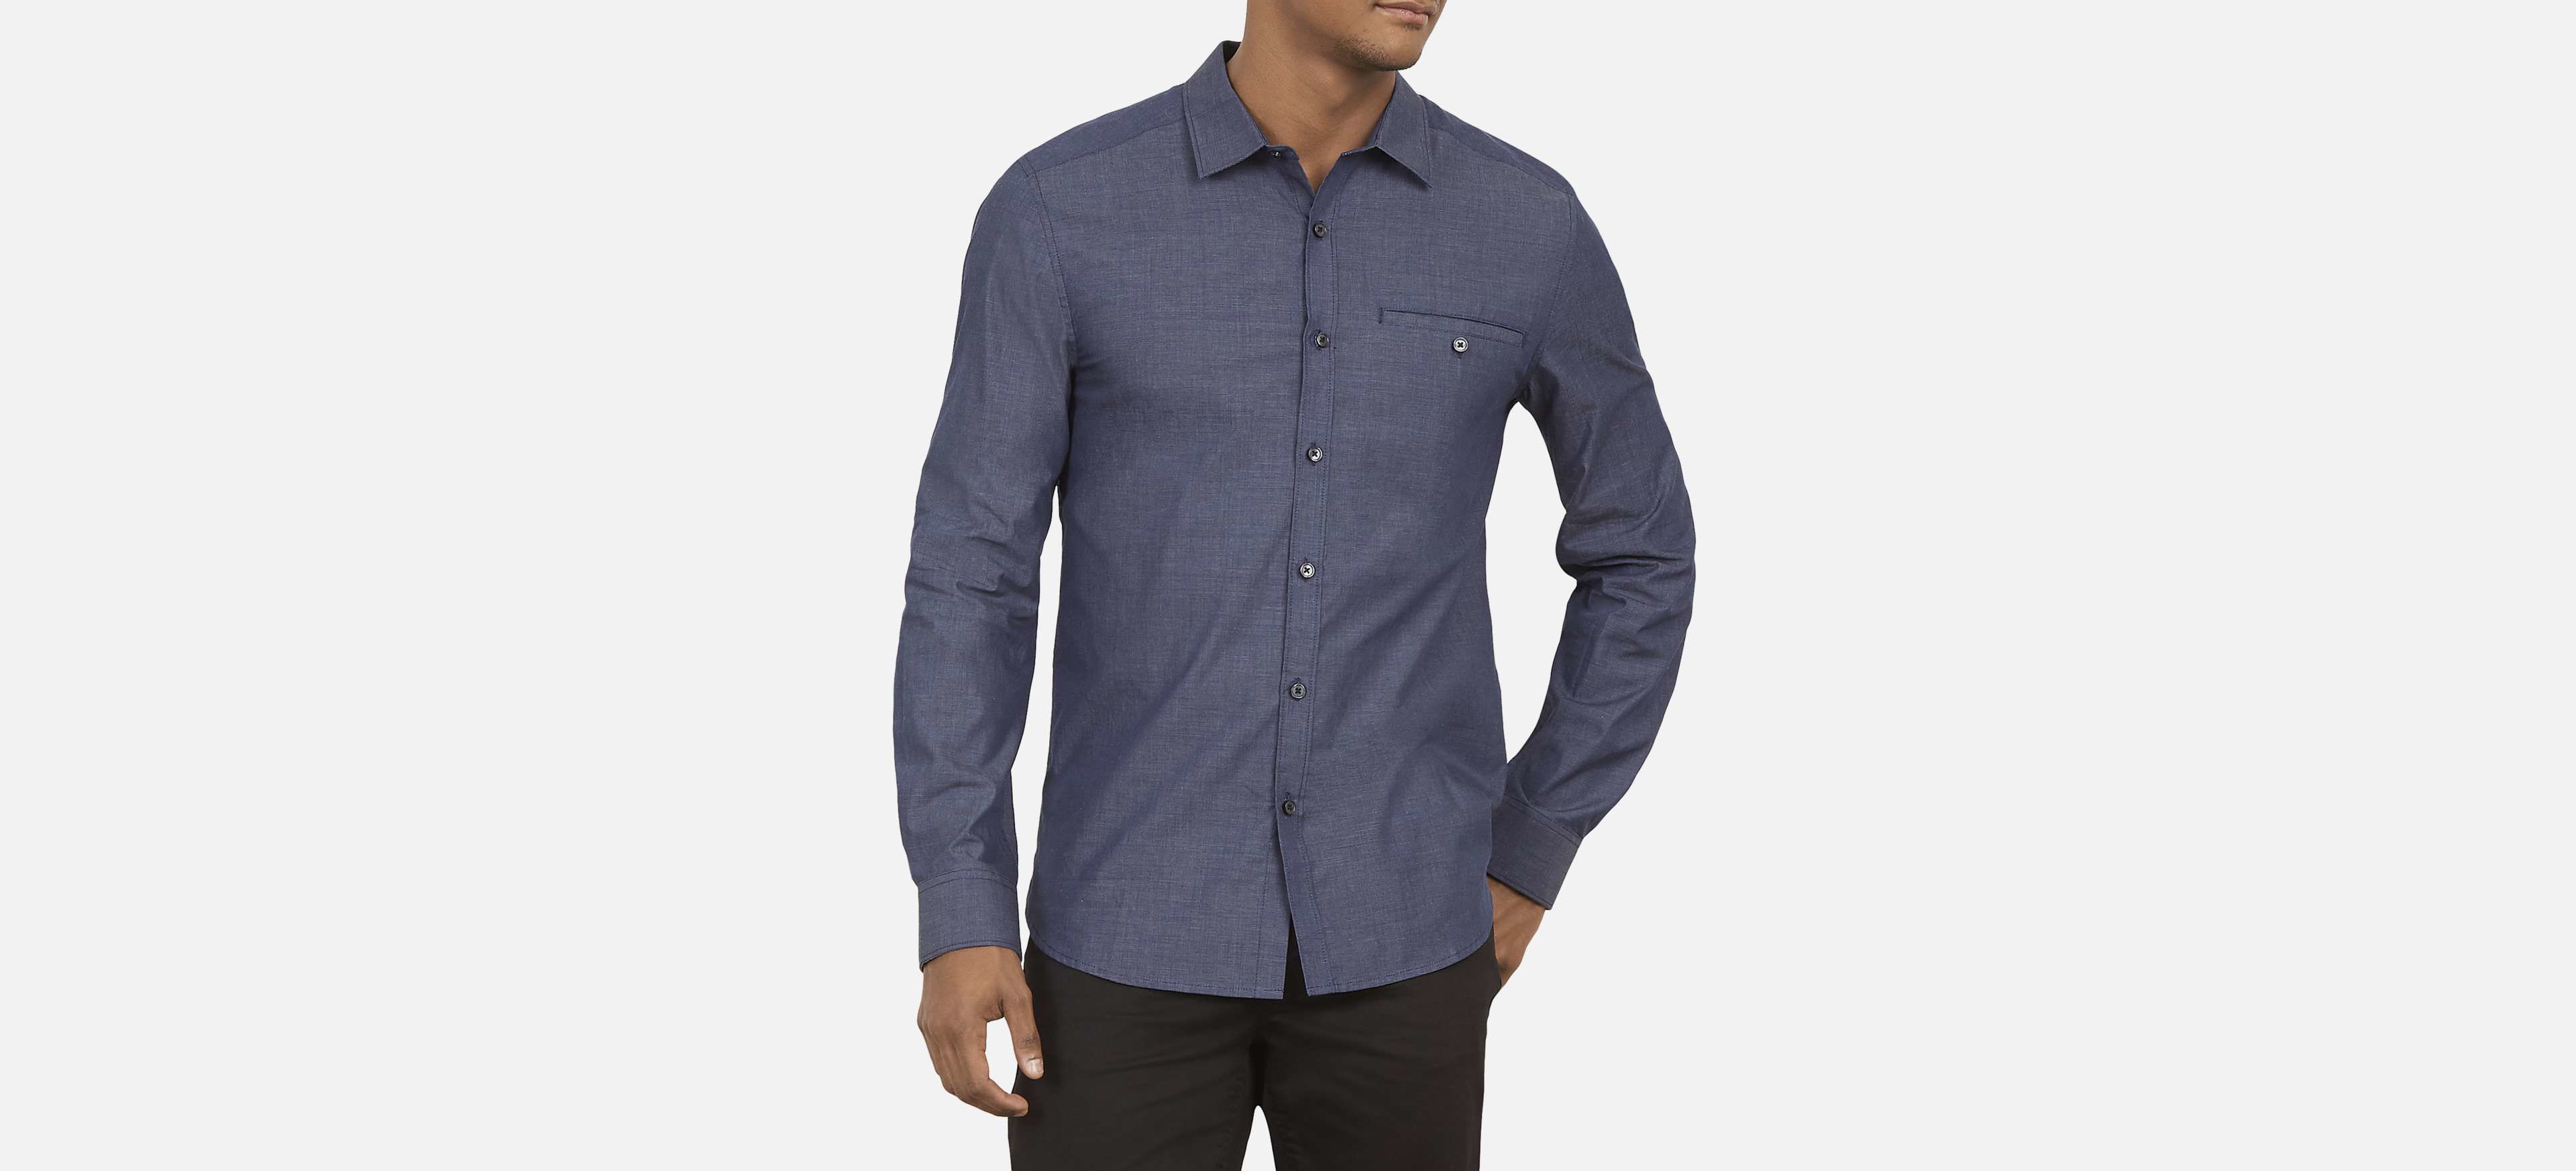 Men's Casual Shirts & Button Downs | Kenneth Cole